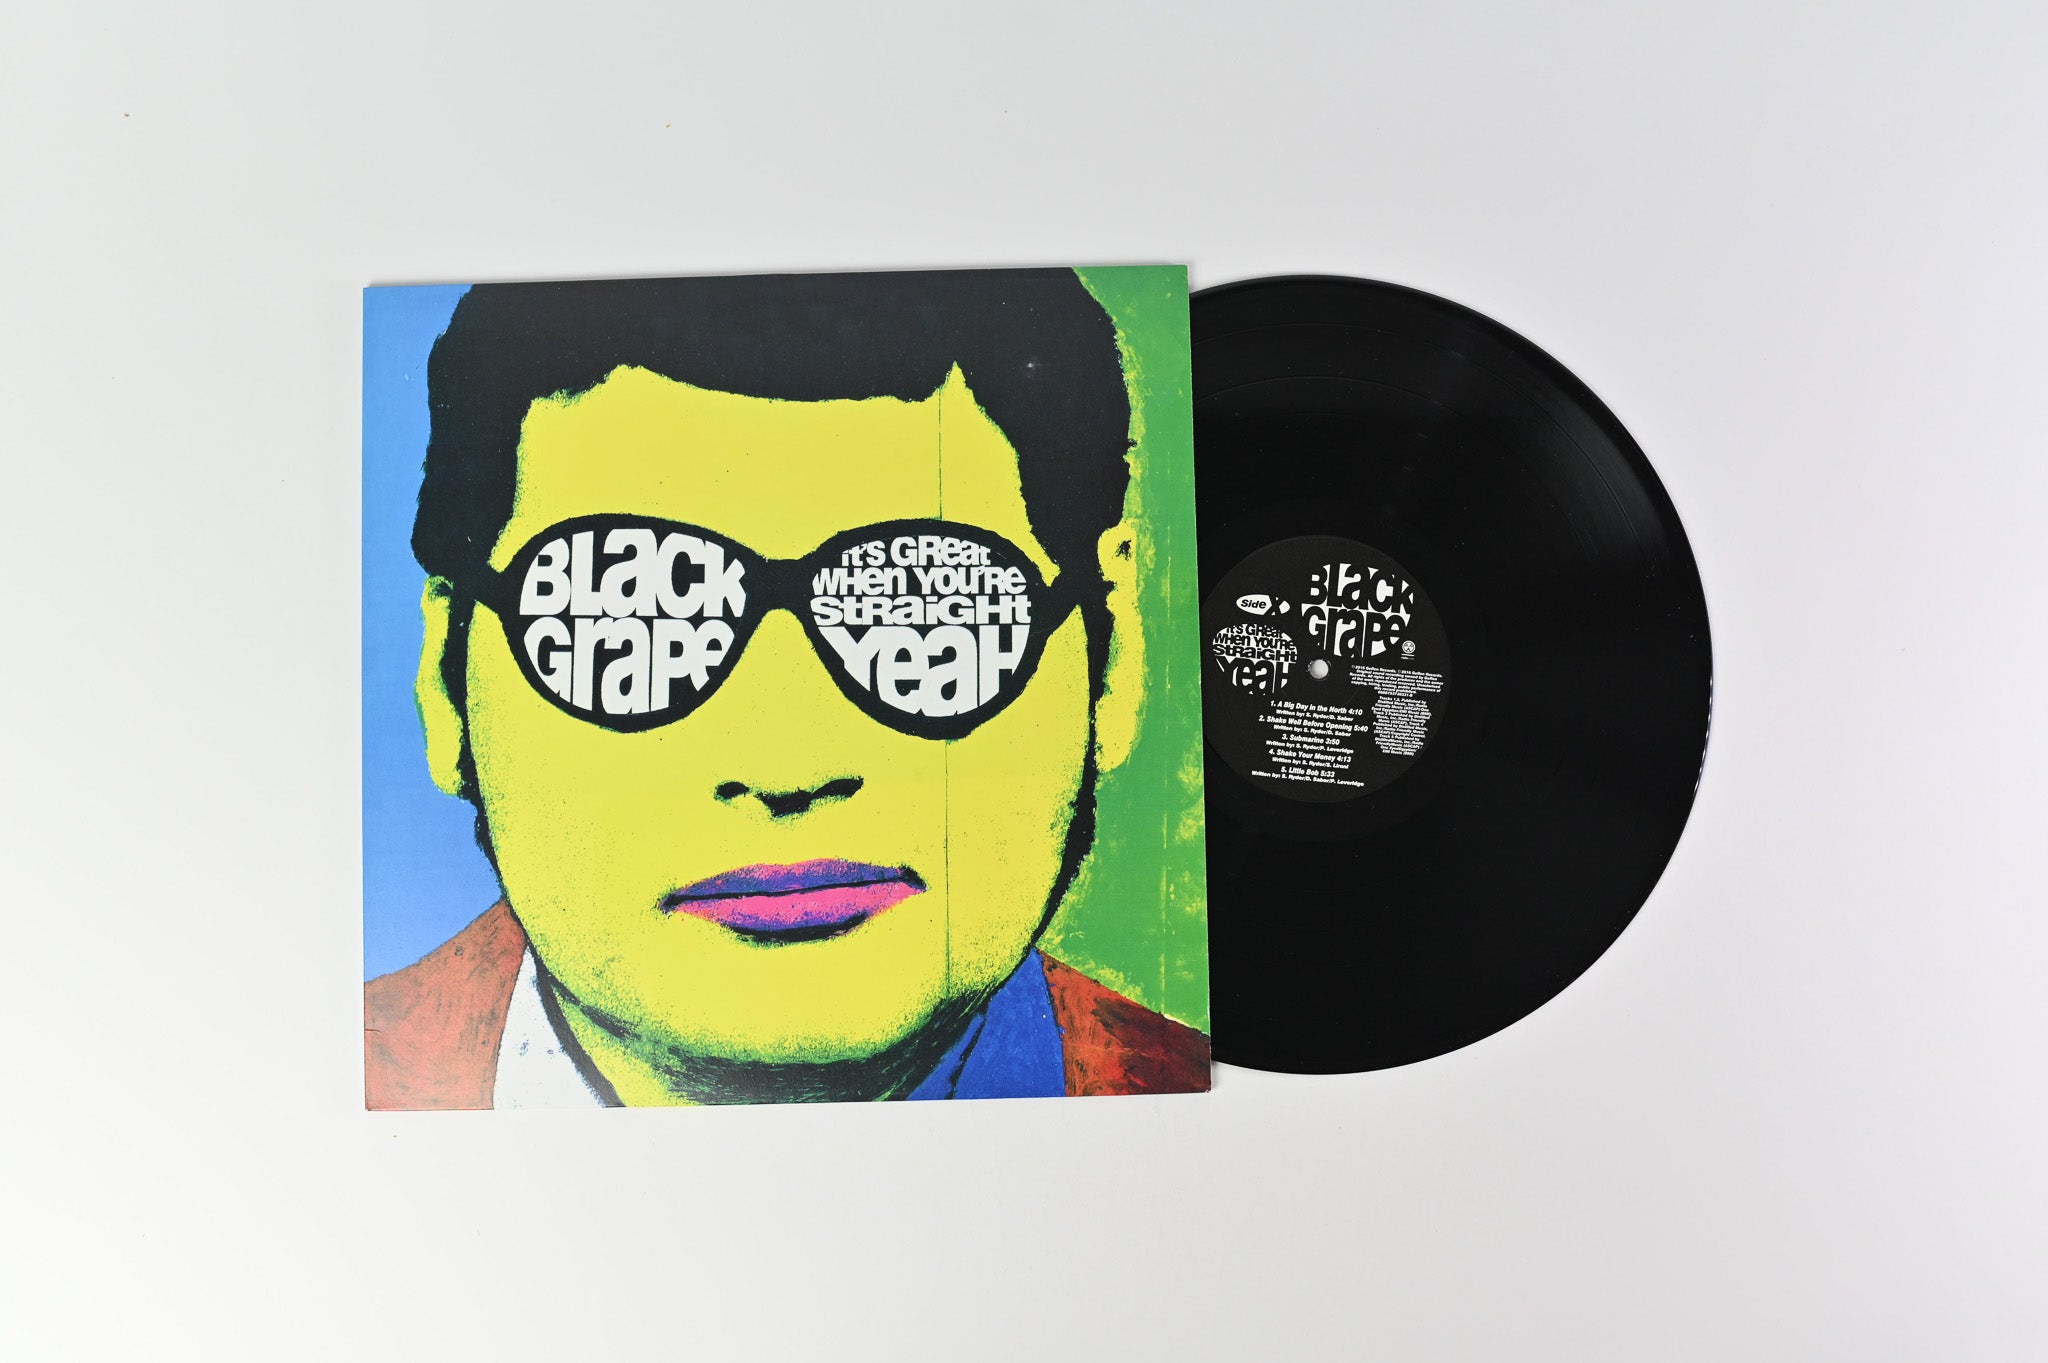 Black Grape - It's Great When You're Straight...Yeah on Radioactive